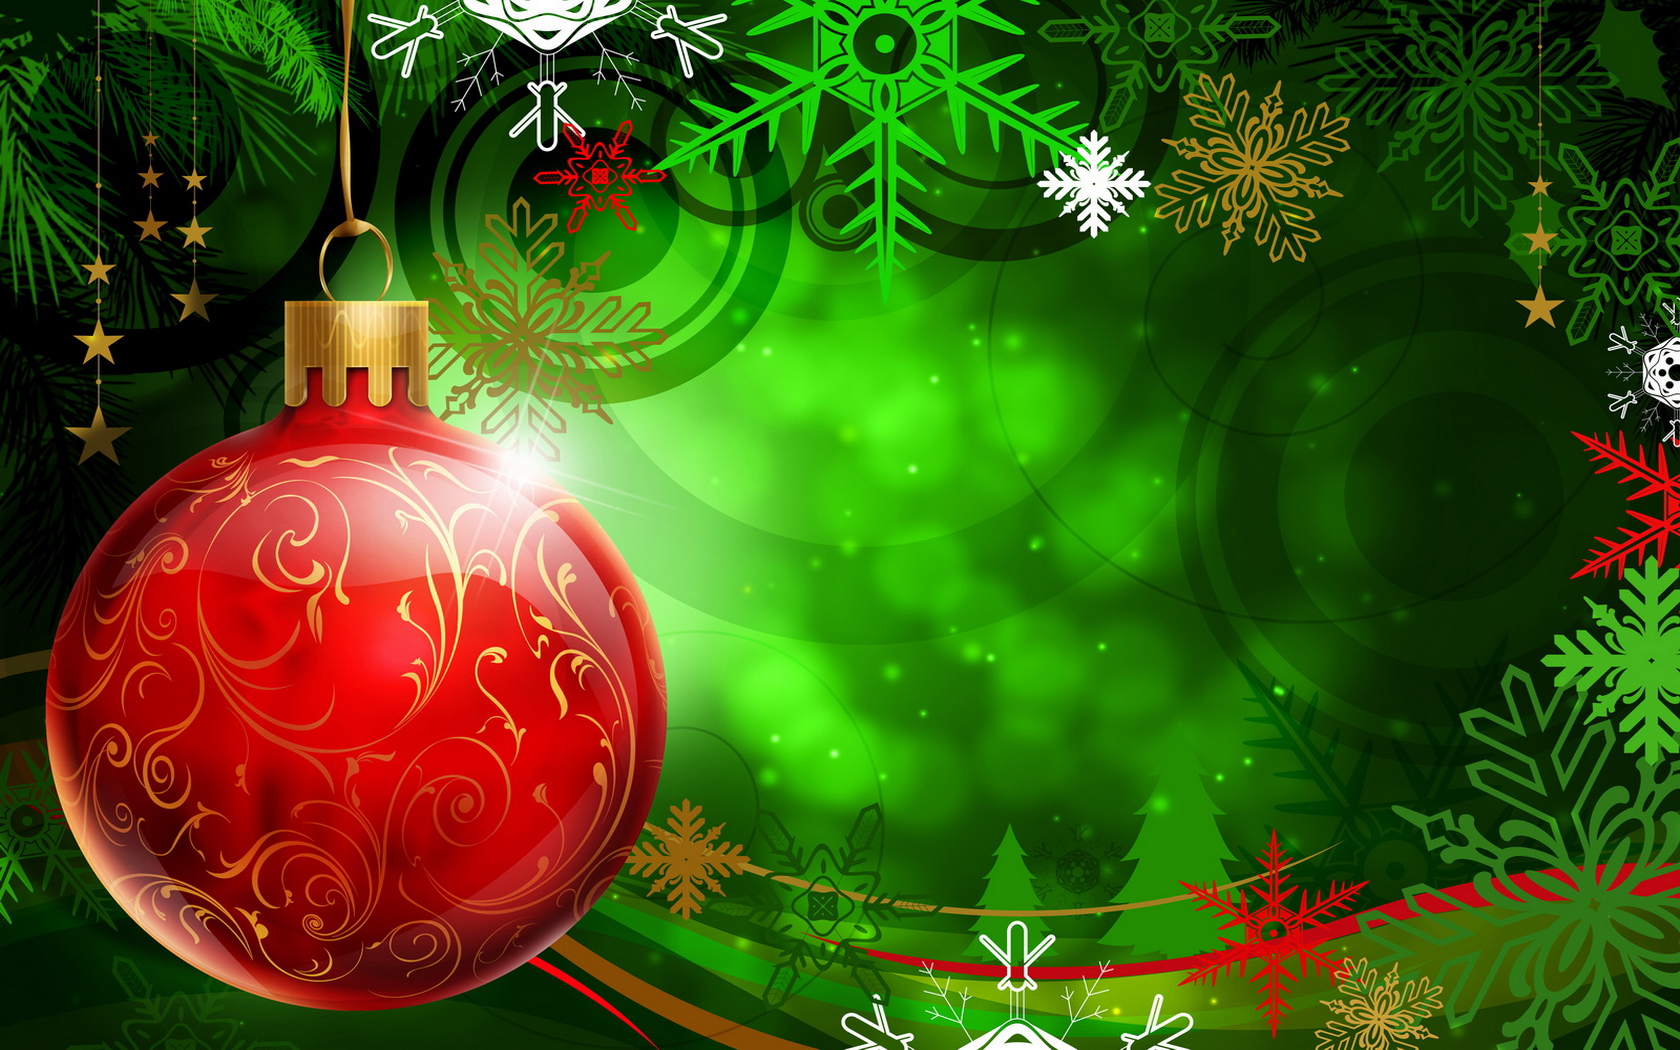 Top Christmas Wallpaper And Themes For